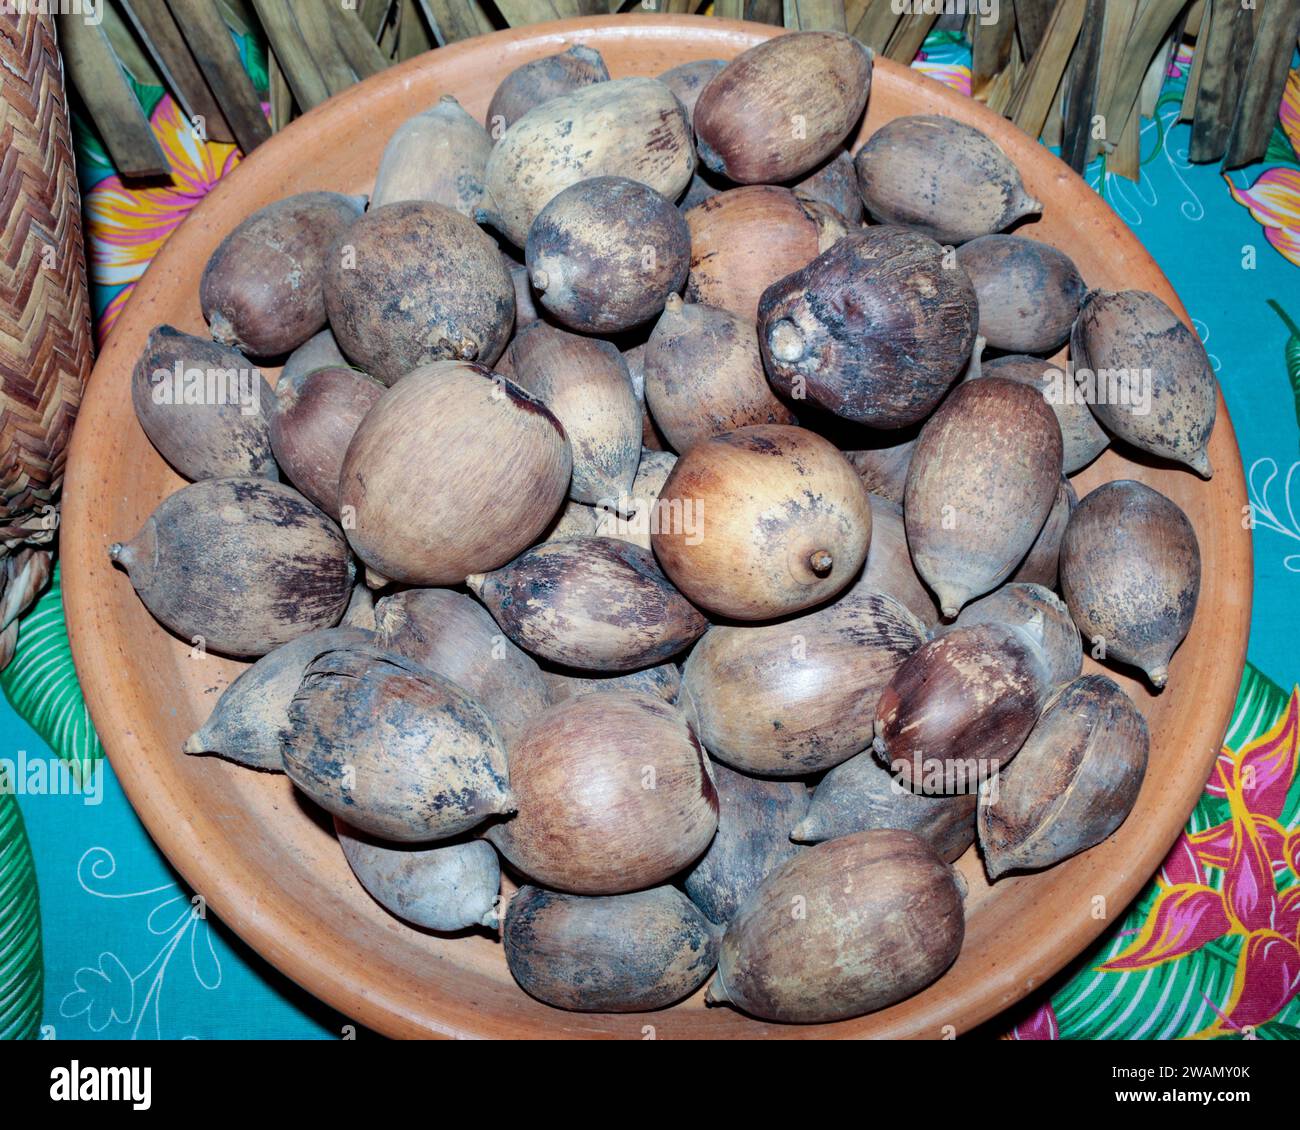 Coconuts, from the babassu palm, in a clay bowl, seeds of Attalea speciosa (babaçu, babassu, babassu, cusi) a palm tree from the Arecáceas family. Stock Photo